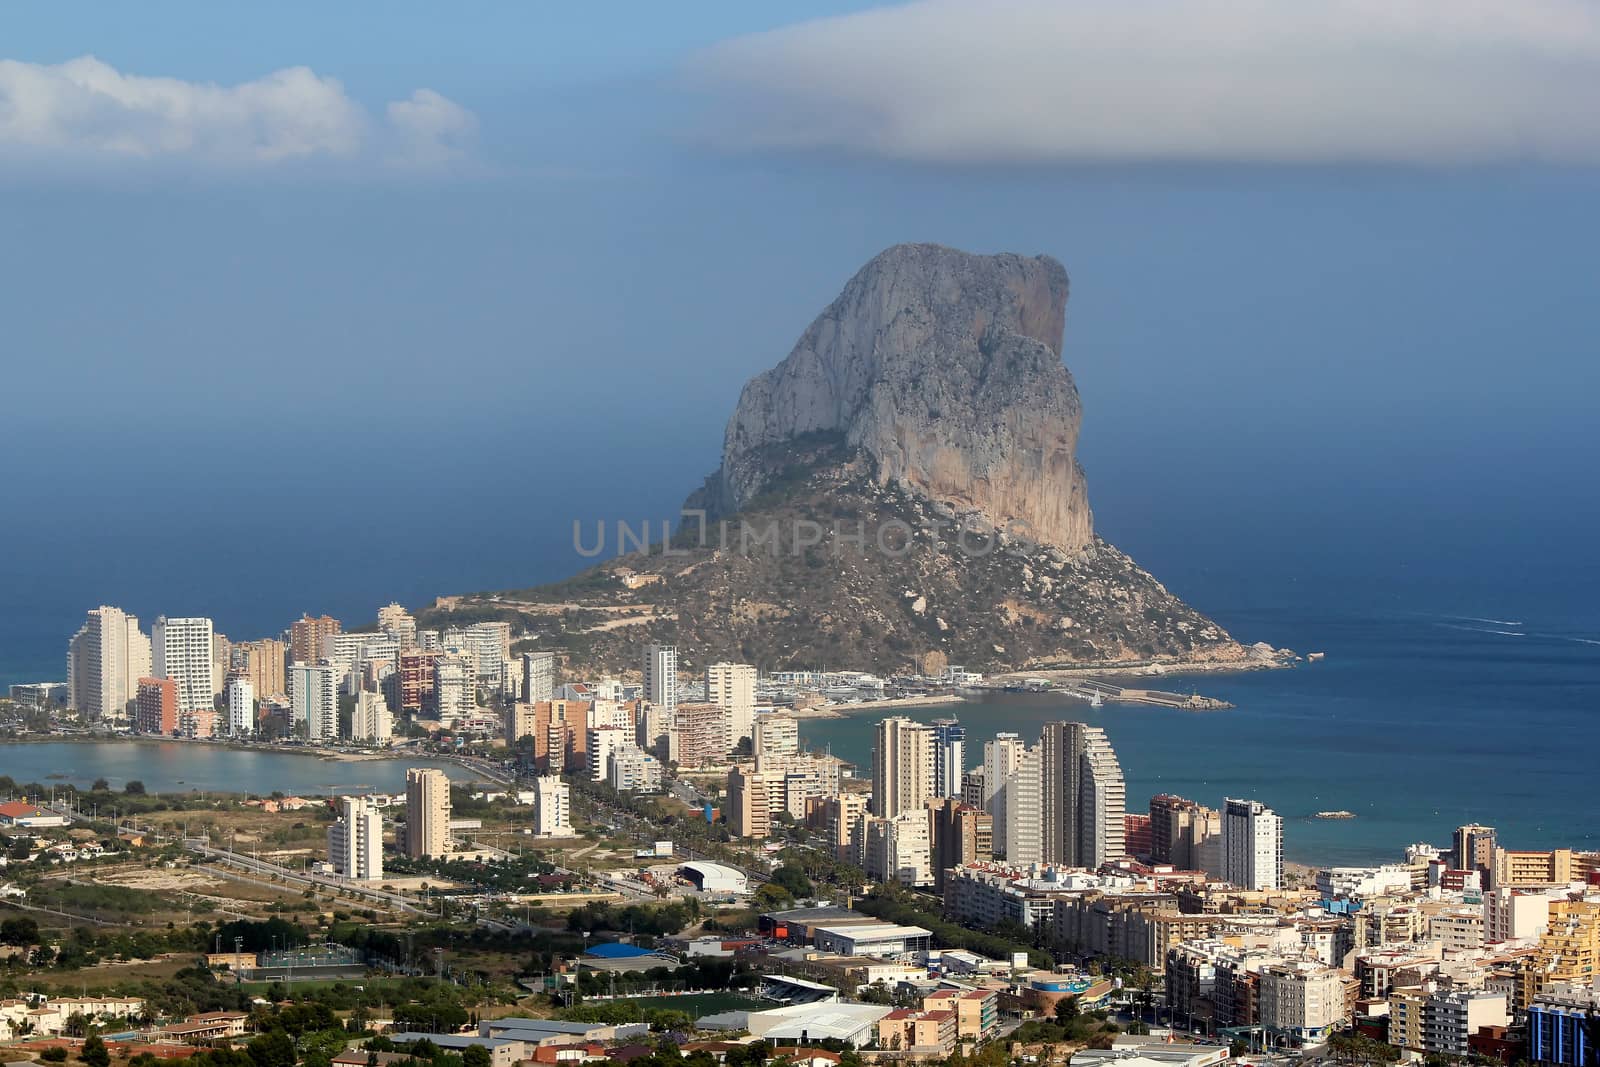 Natural Park of Penon de Ifach situated in Calp, Spain. A massive limestone outcrop emerging from the sea and linked to the shore by rock debris. Is home to numerous rare plants and over 300 species of animals, and nesting site for sea birds and other birds.